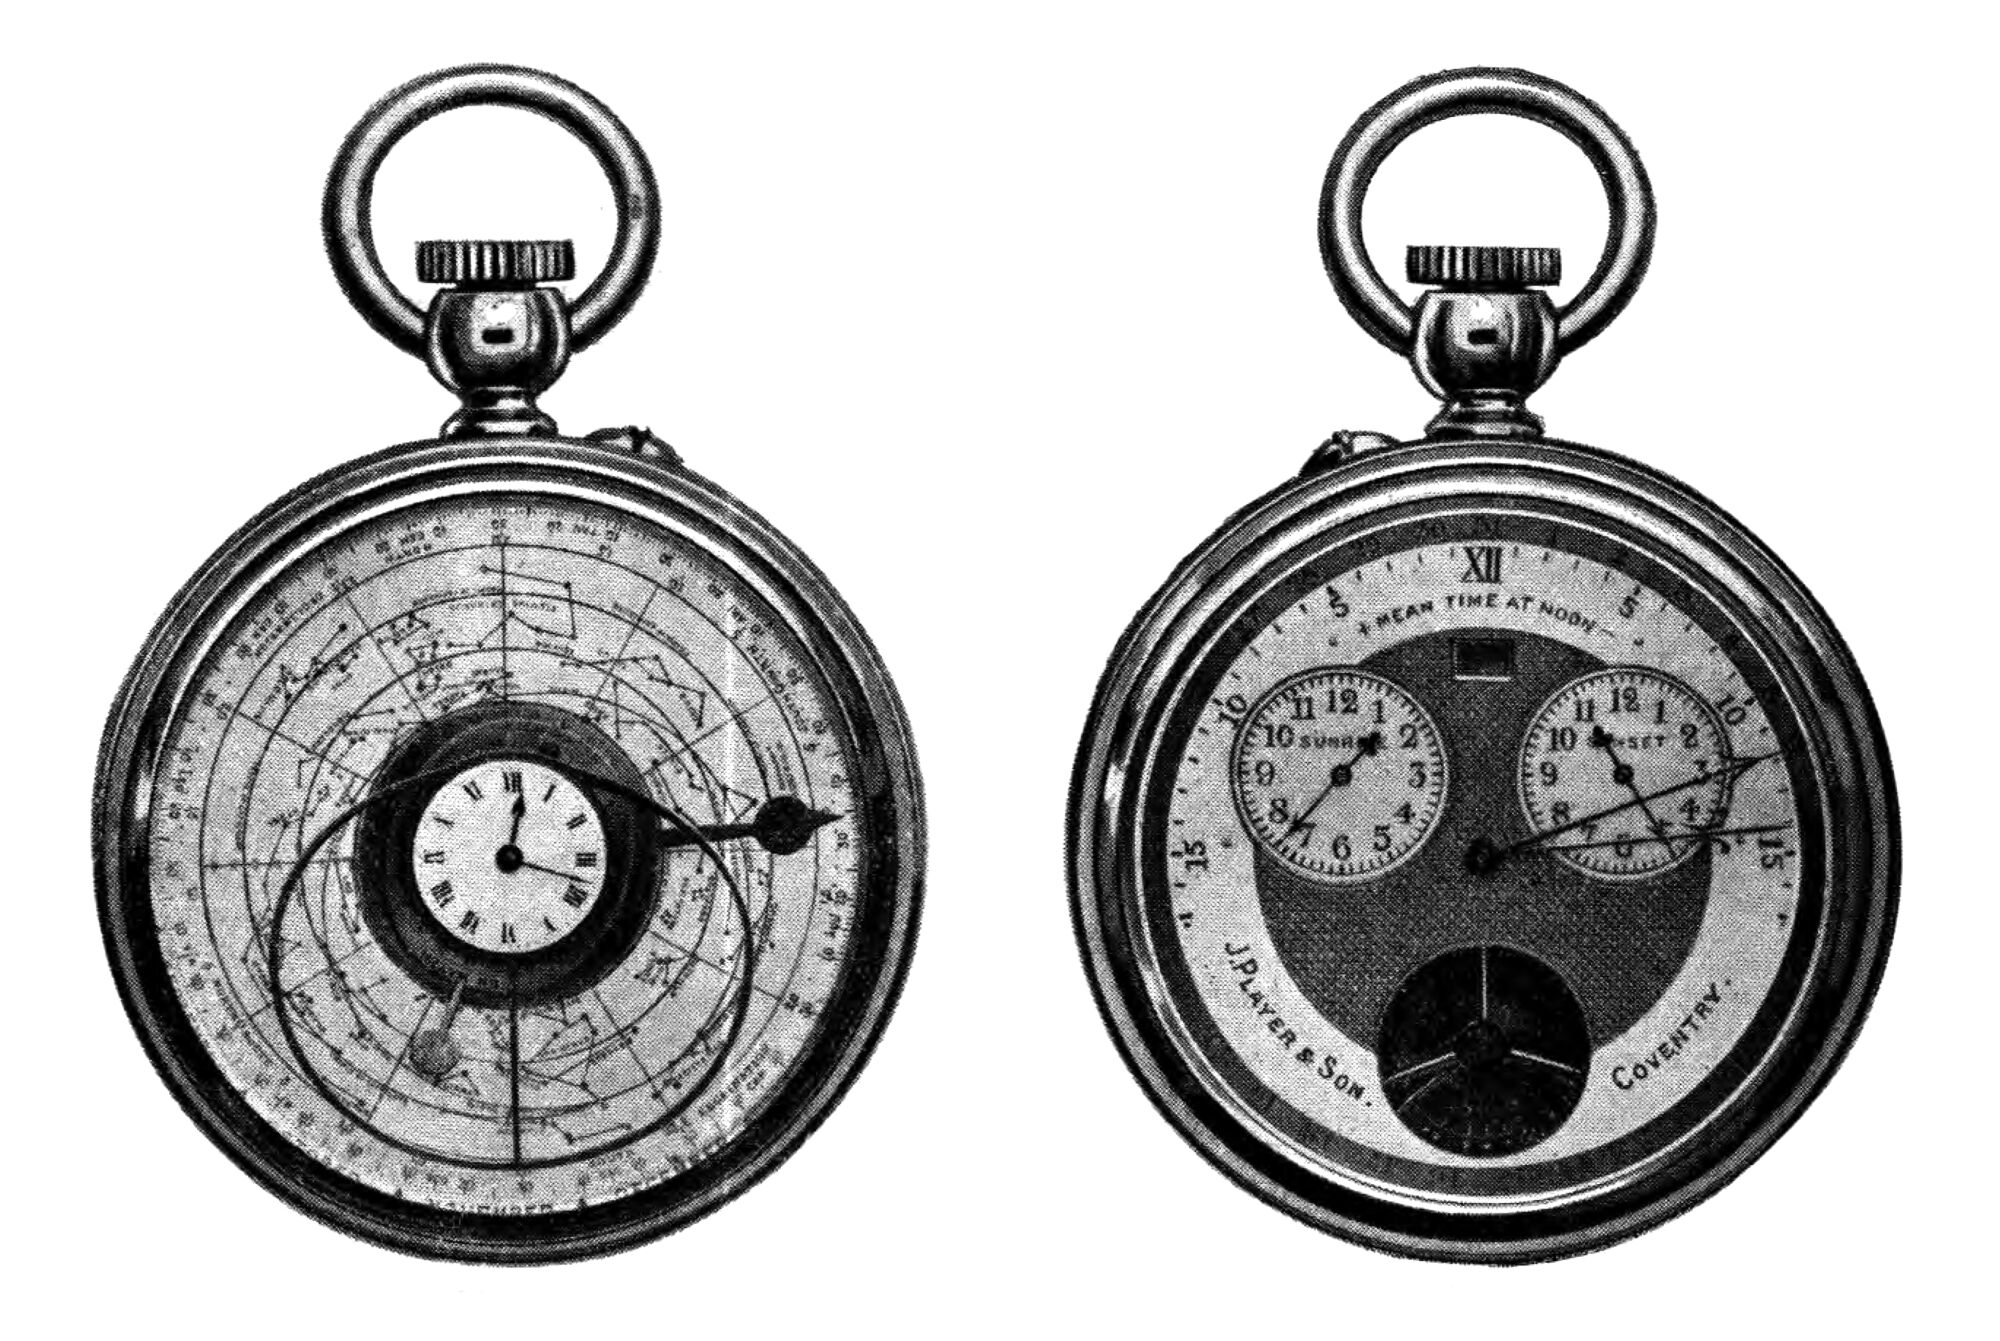 Two images show both sides of the J. Player & Son supercomplication pocket watch 